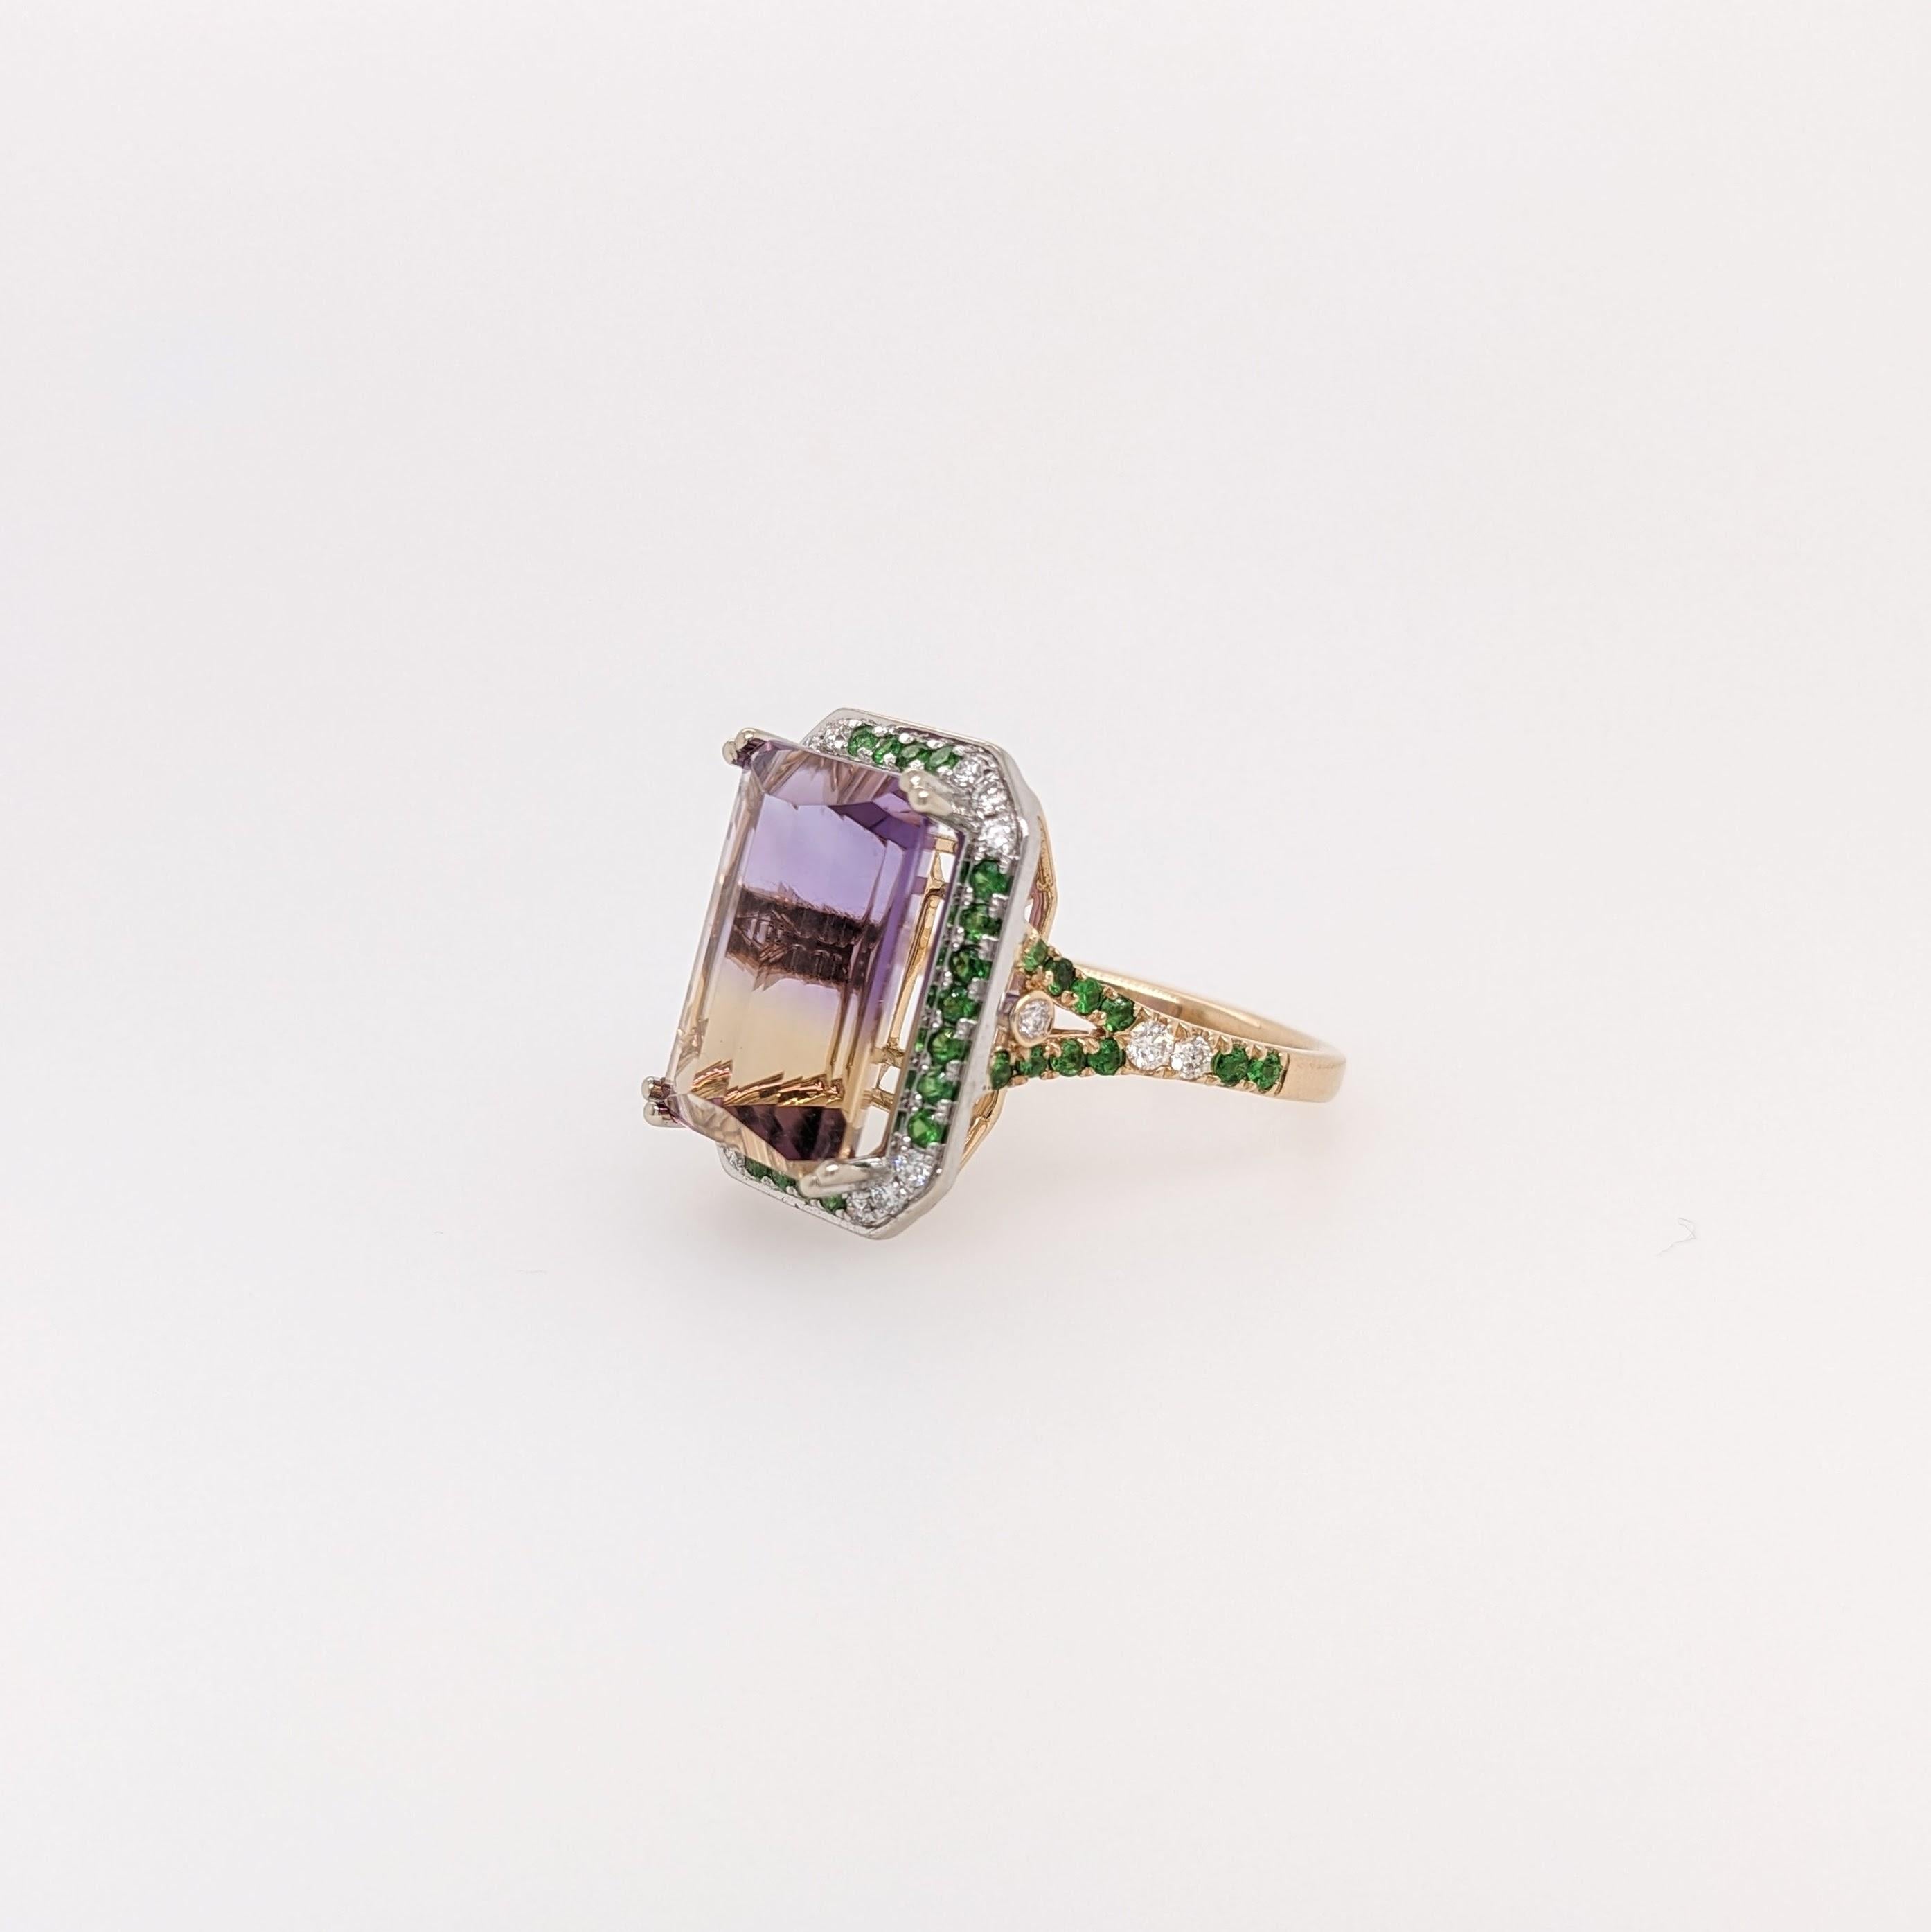 One of a kind colorful statement ring featuring a gorgeous barrel cut Ametrine in a dual tone 14k gold setting with green tsavorite garnet and natural diamond accents. This ring make a great statement piece!

~~~~~

Specifications:

Item Type: